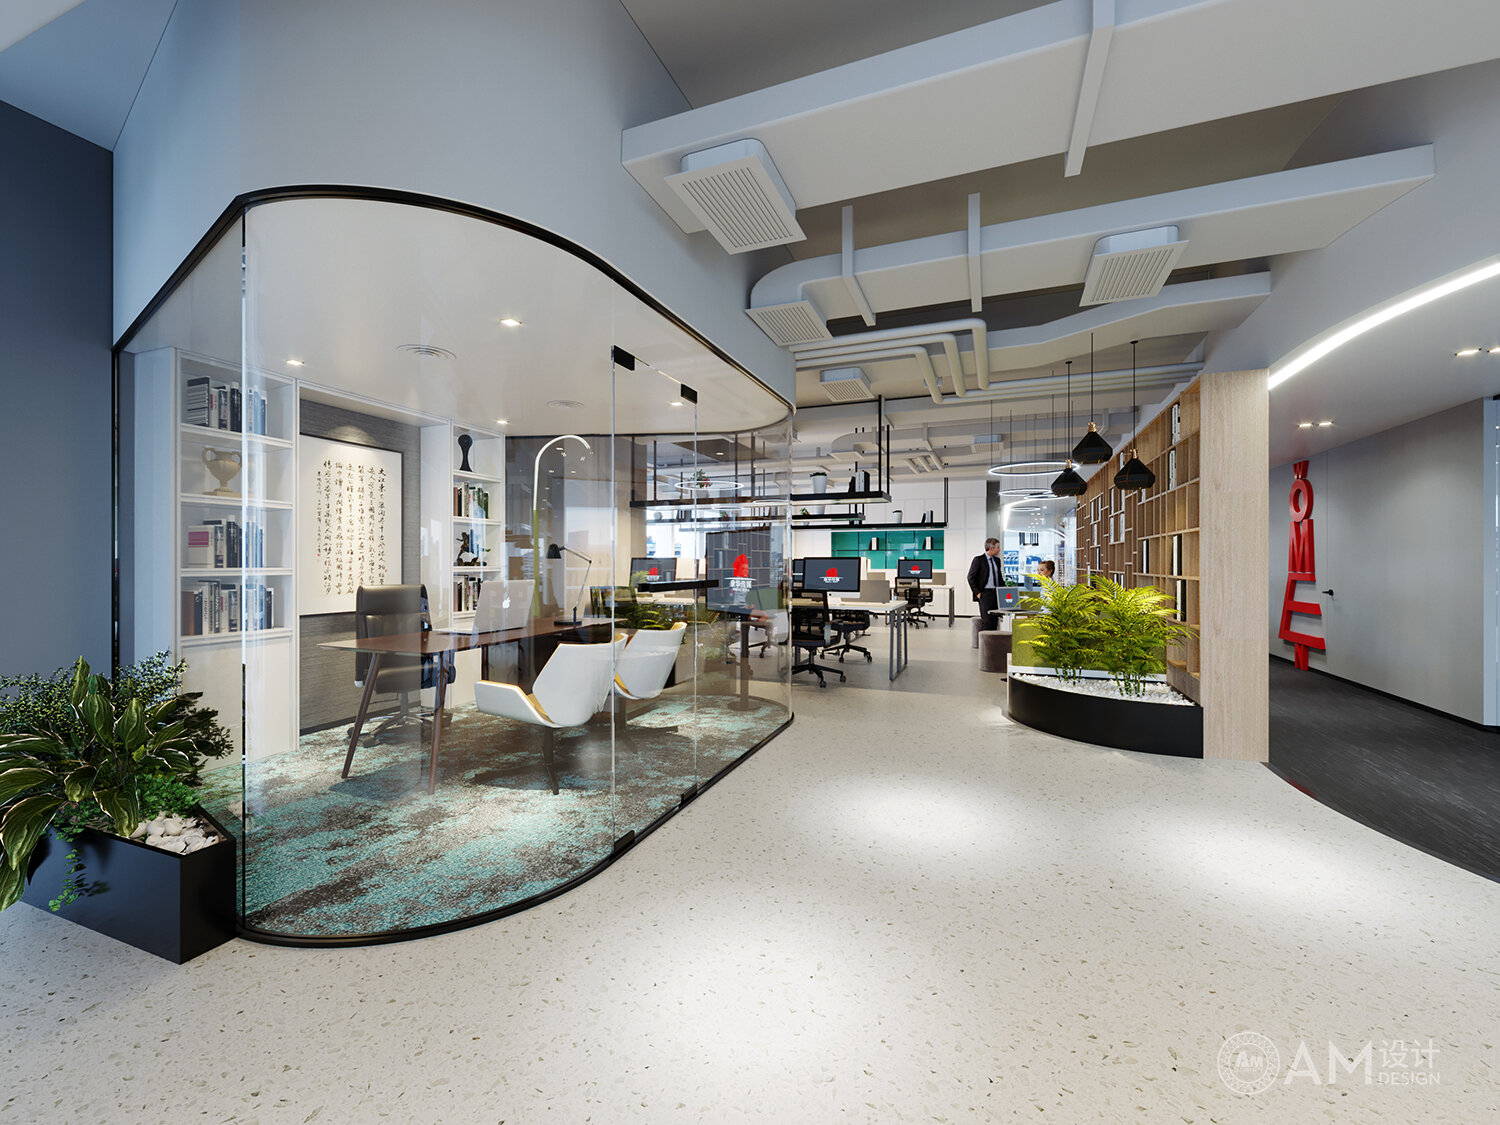 AM DESIGN | The meeting room design of the office area of Shandong Kanghua Media Internet Company